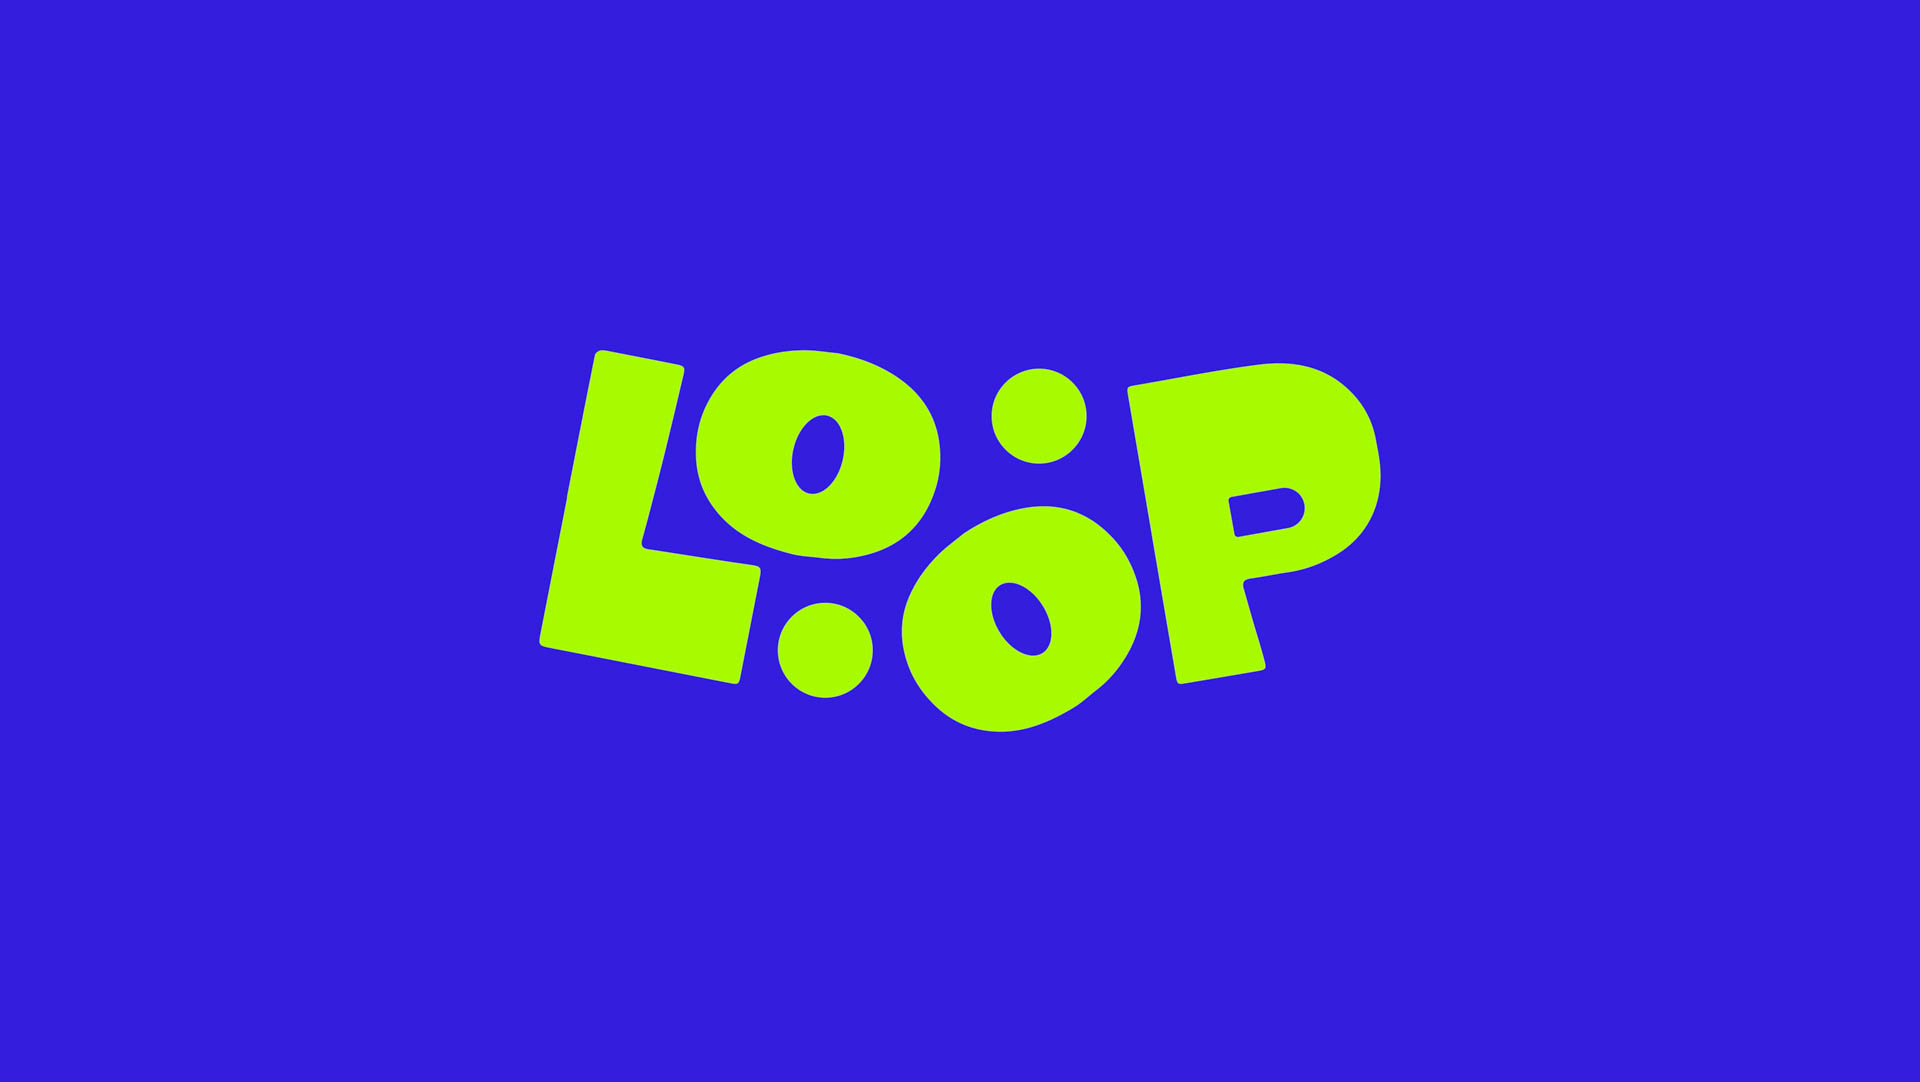 Loop logo on a blue background